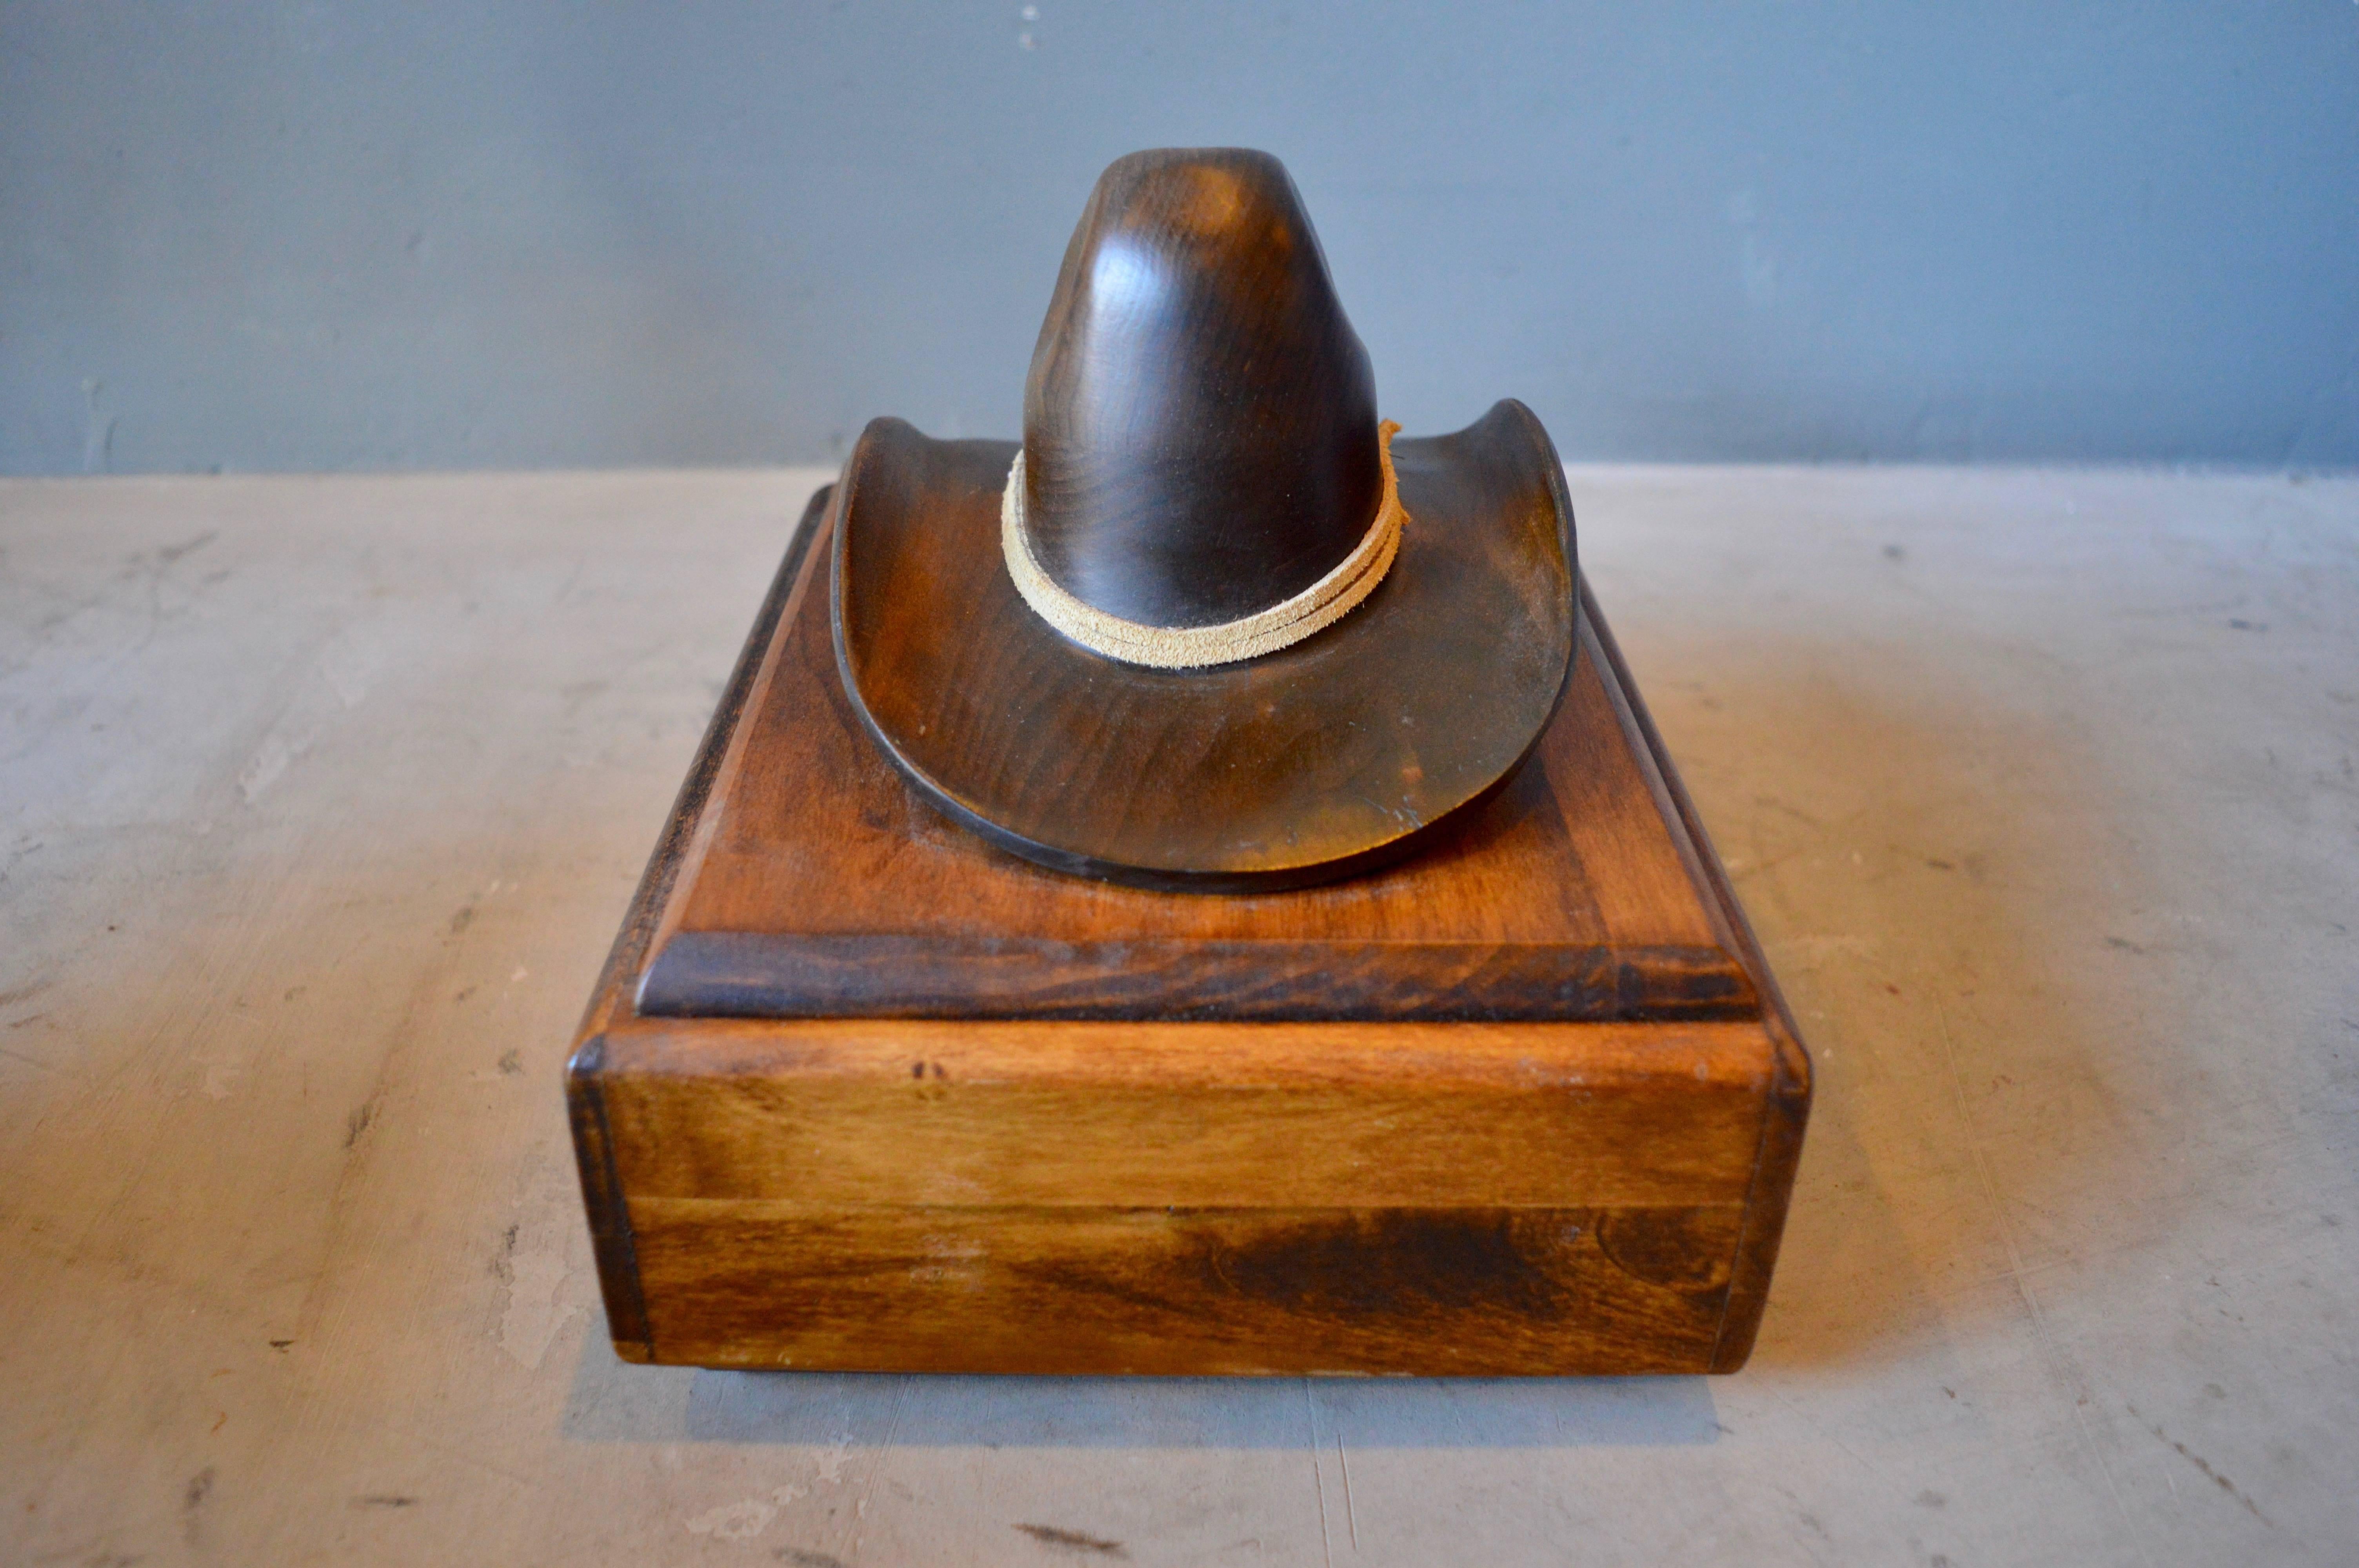 Cool hand-carved wood box with a cowboy hat lid. Fantastic piece of Folk Art. Excellent workmanship. Signed 1981 underneath lid. Great tabletop box and functional sculpture. Excellent condition.